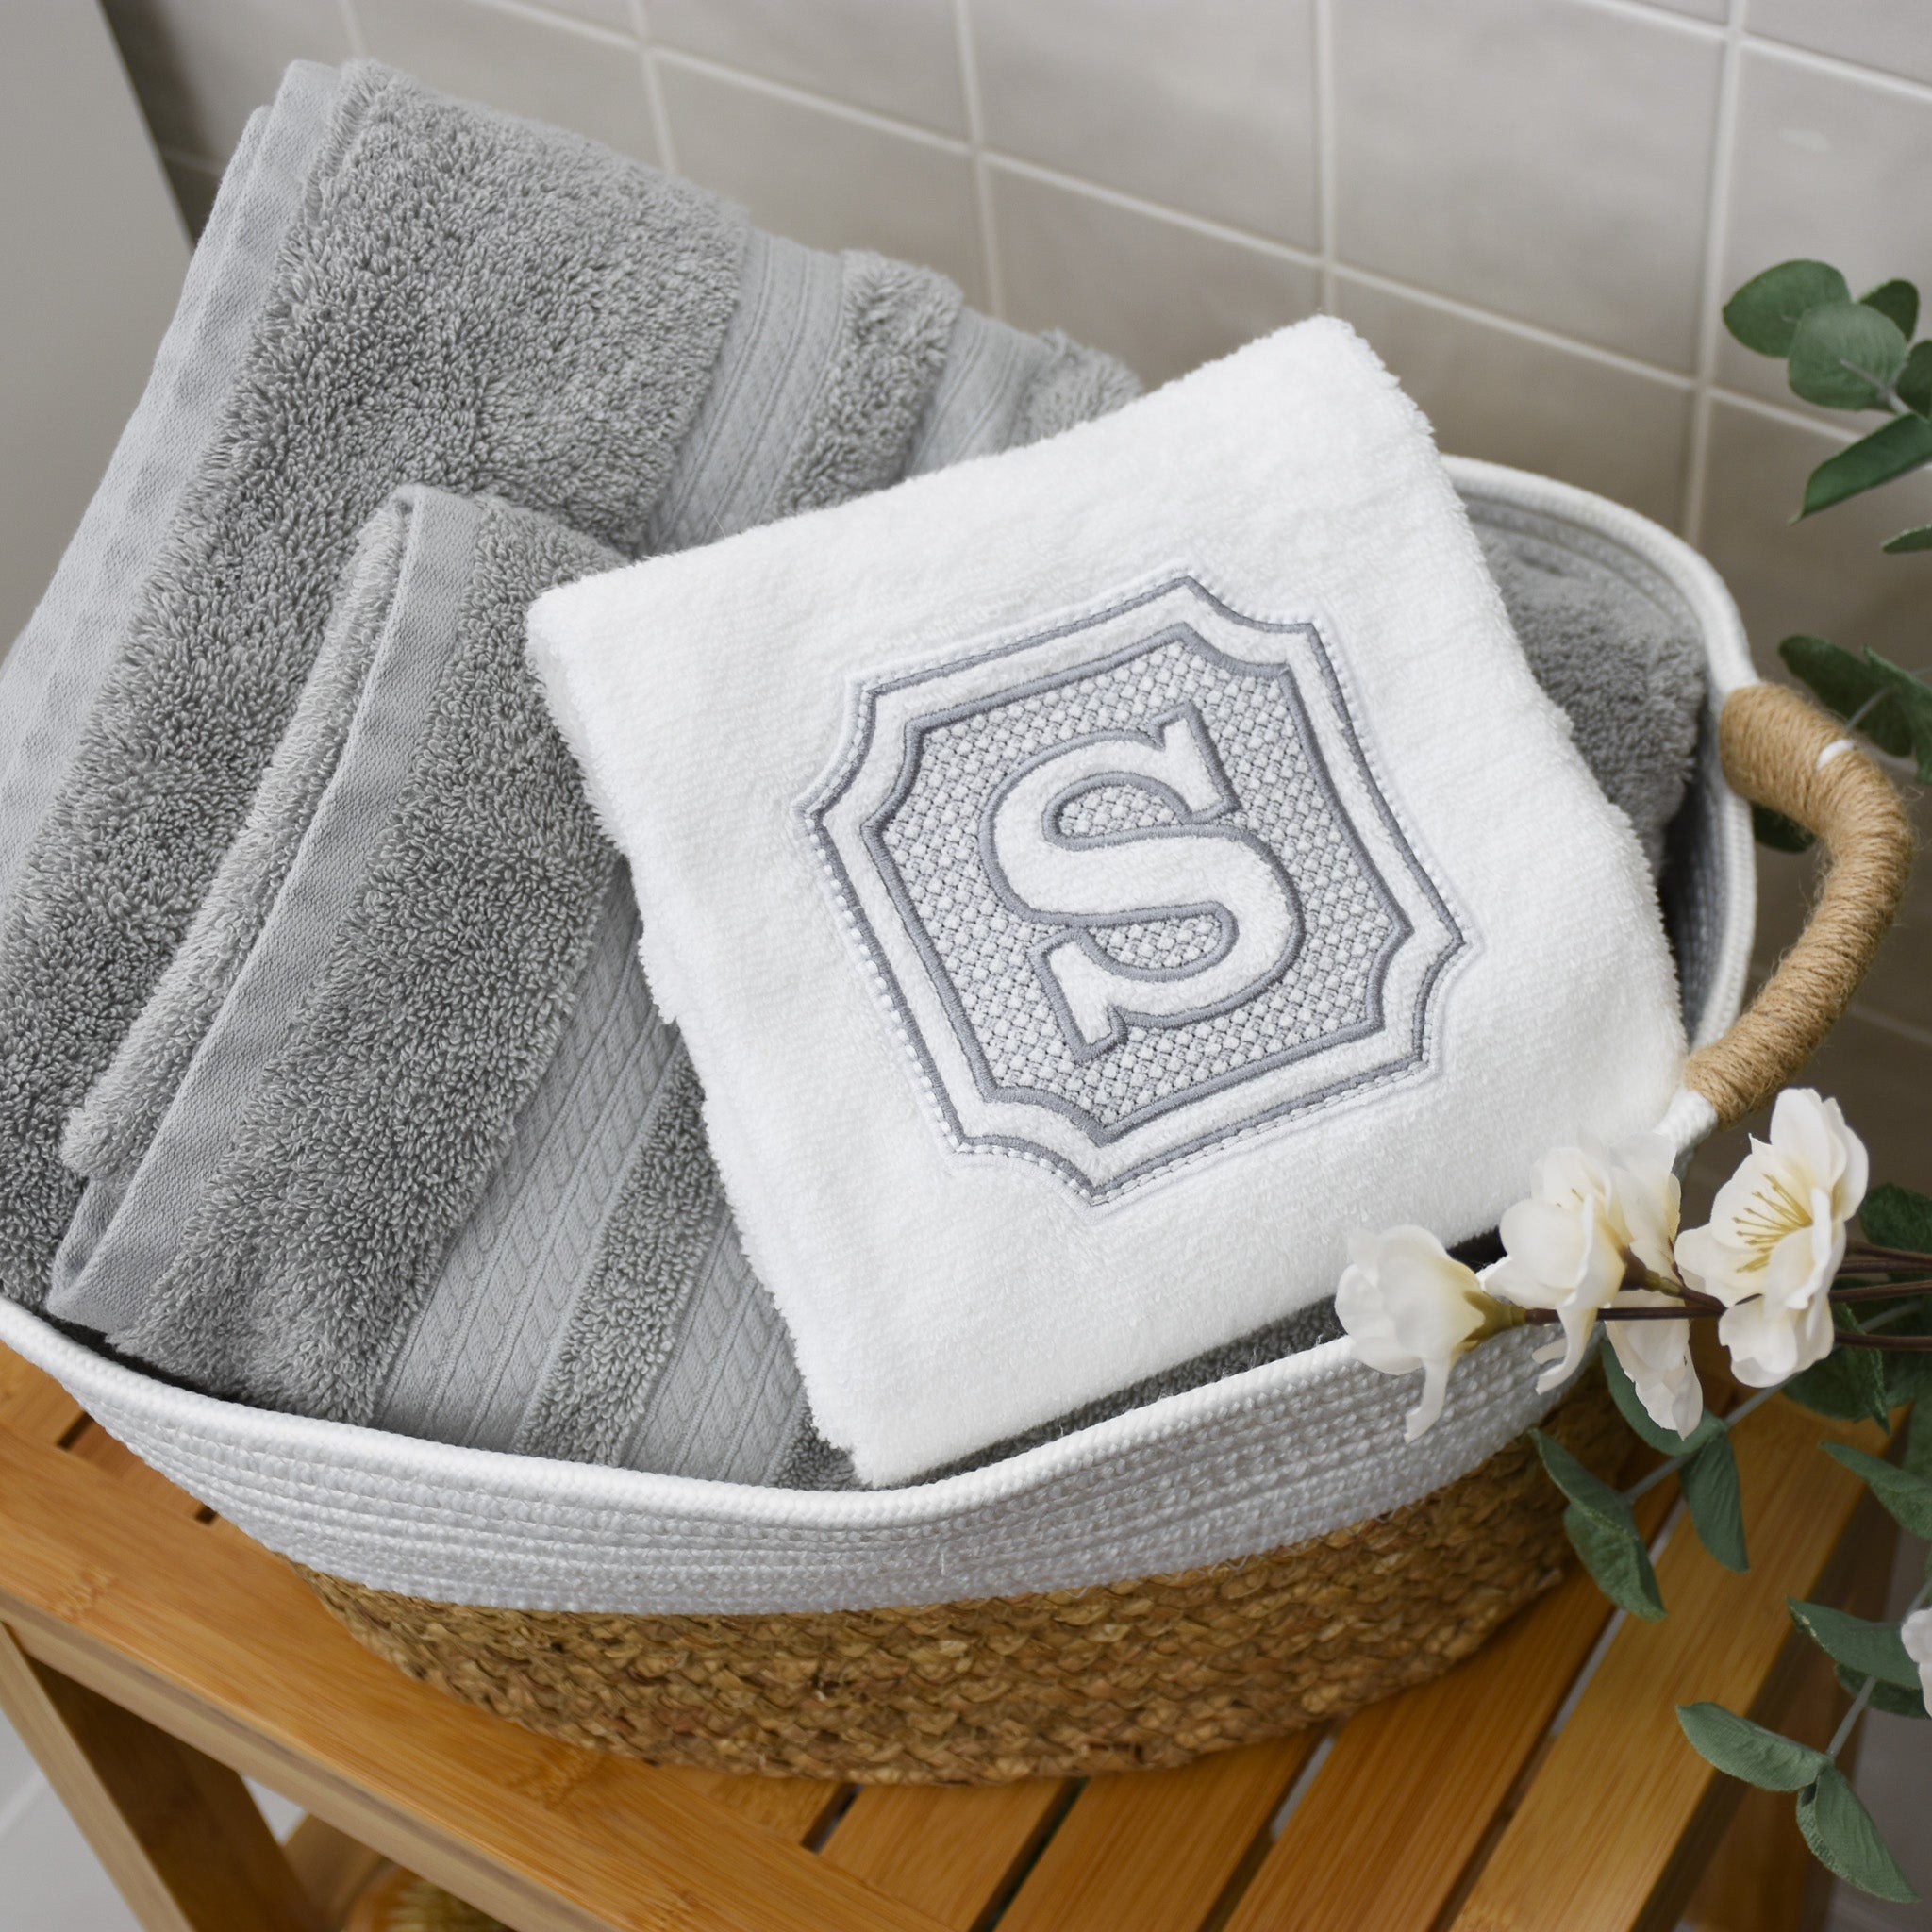 Personalized embroidered hand towel with S initial with coordination silver bath towels